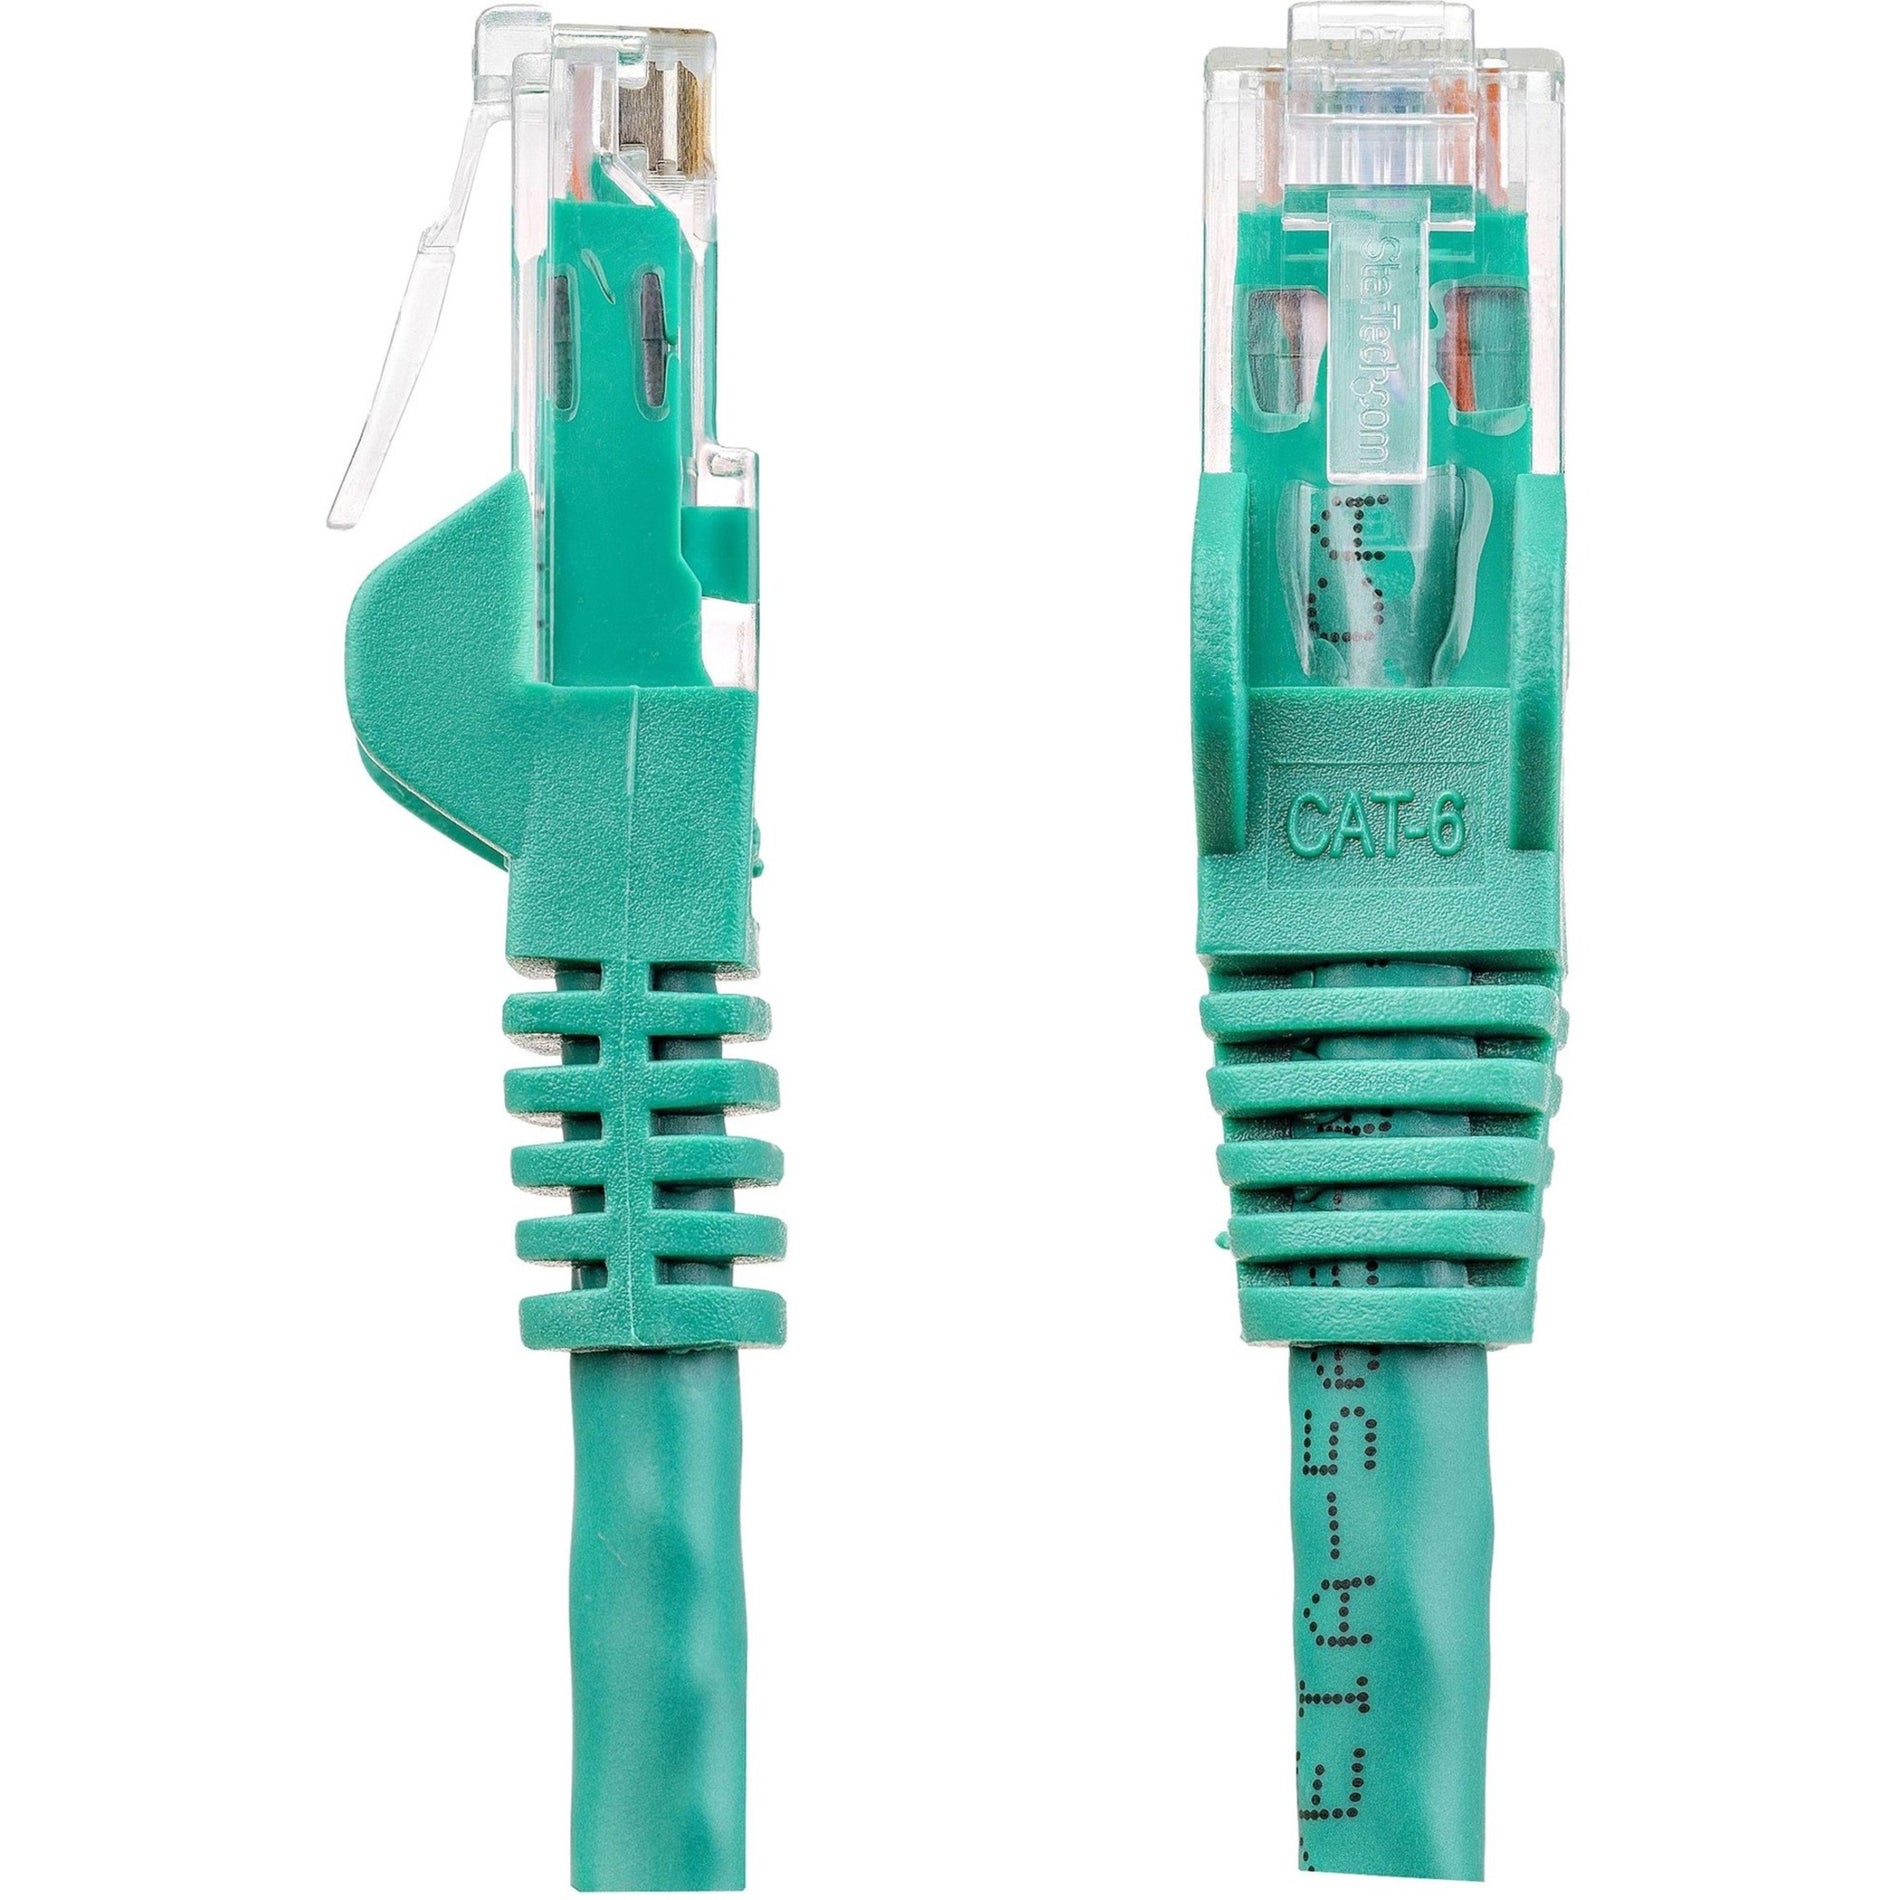 StarTech.com N6PATCH1GN Cat6 Patch Cable, 1ft Green Ethernet Cable, Snagless RJ45 Connectors